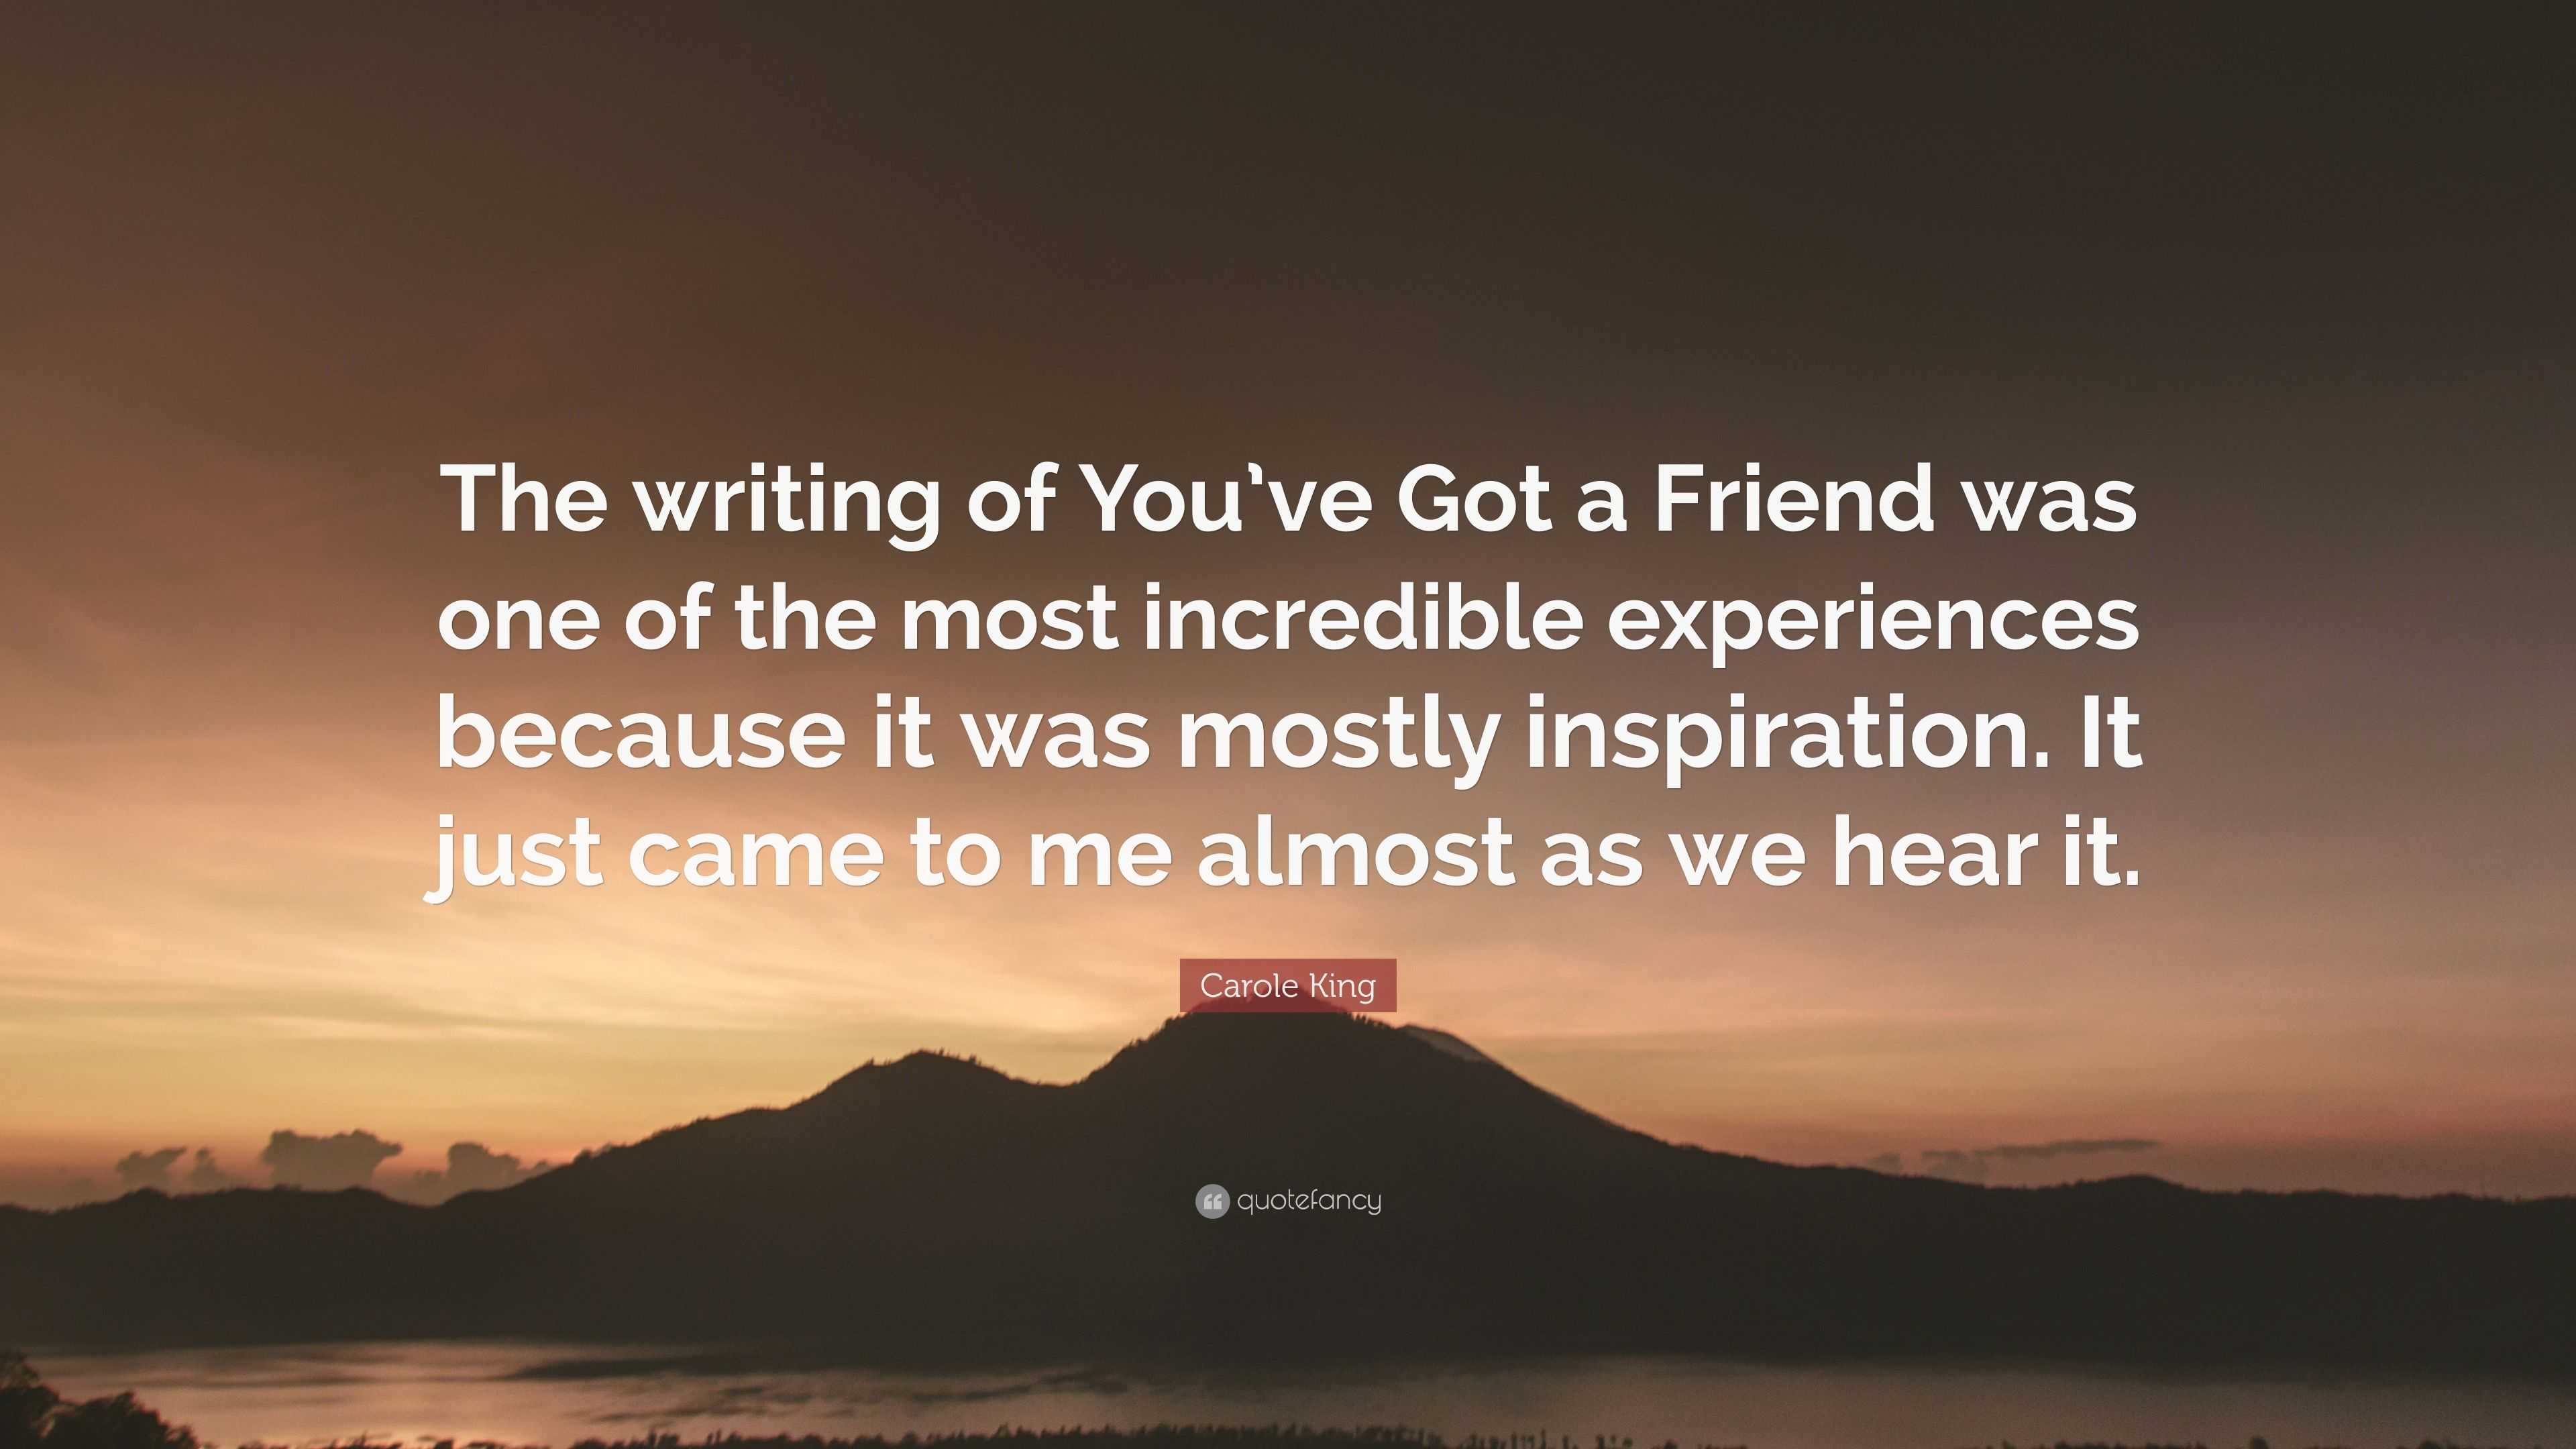 Carole King Quote The Writing Of You Ve Got A Friend Was One Of The Most Incredible Experiences Because It Was Mostly Inspiration It Just 7 Wallpapers Quotefancy